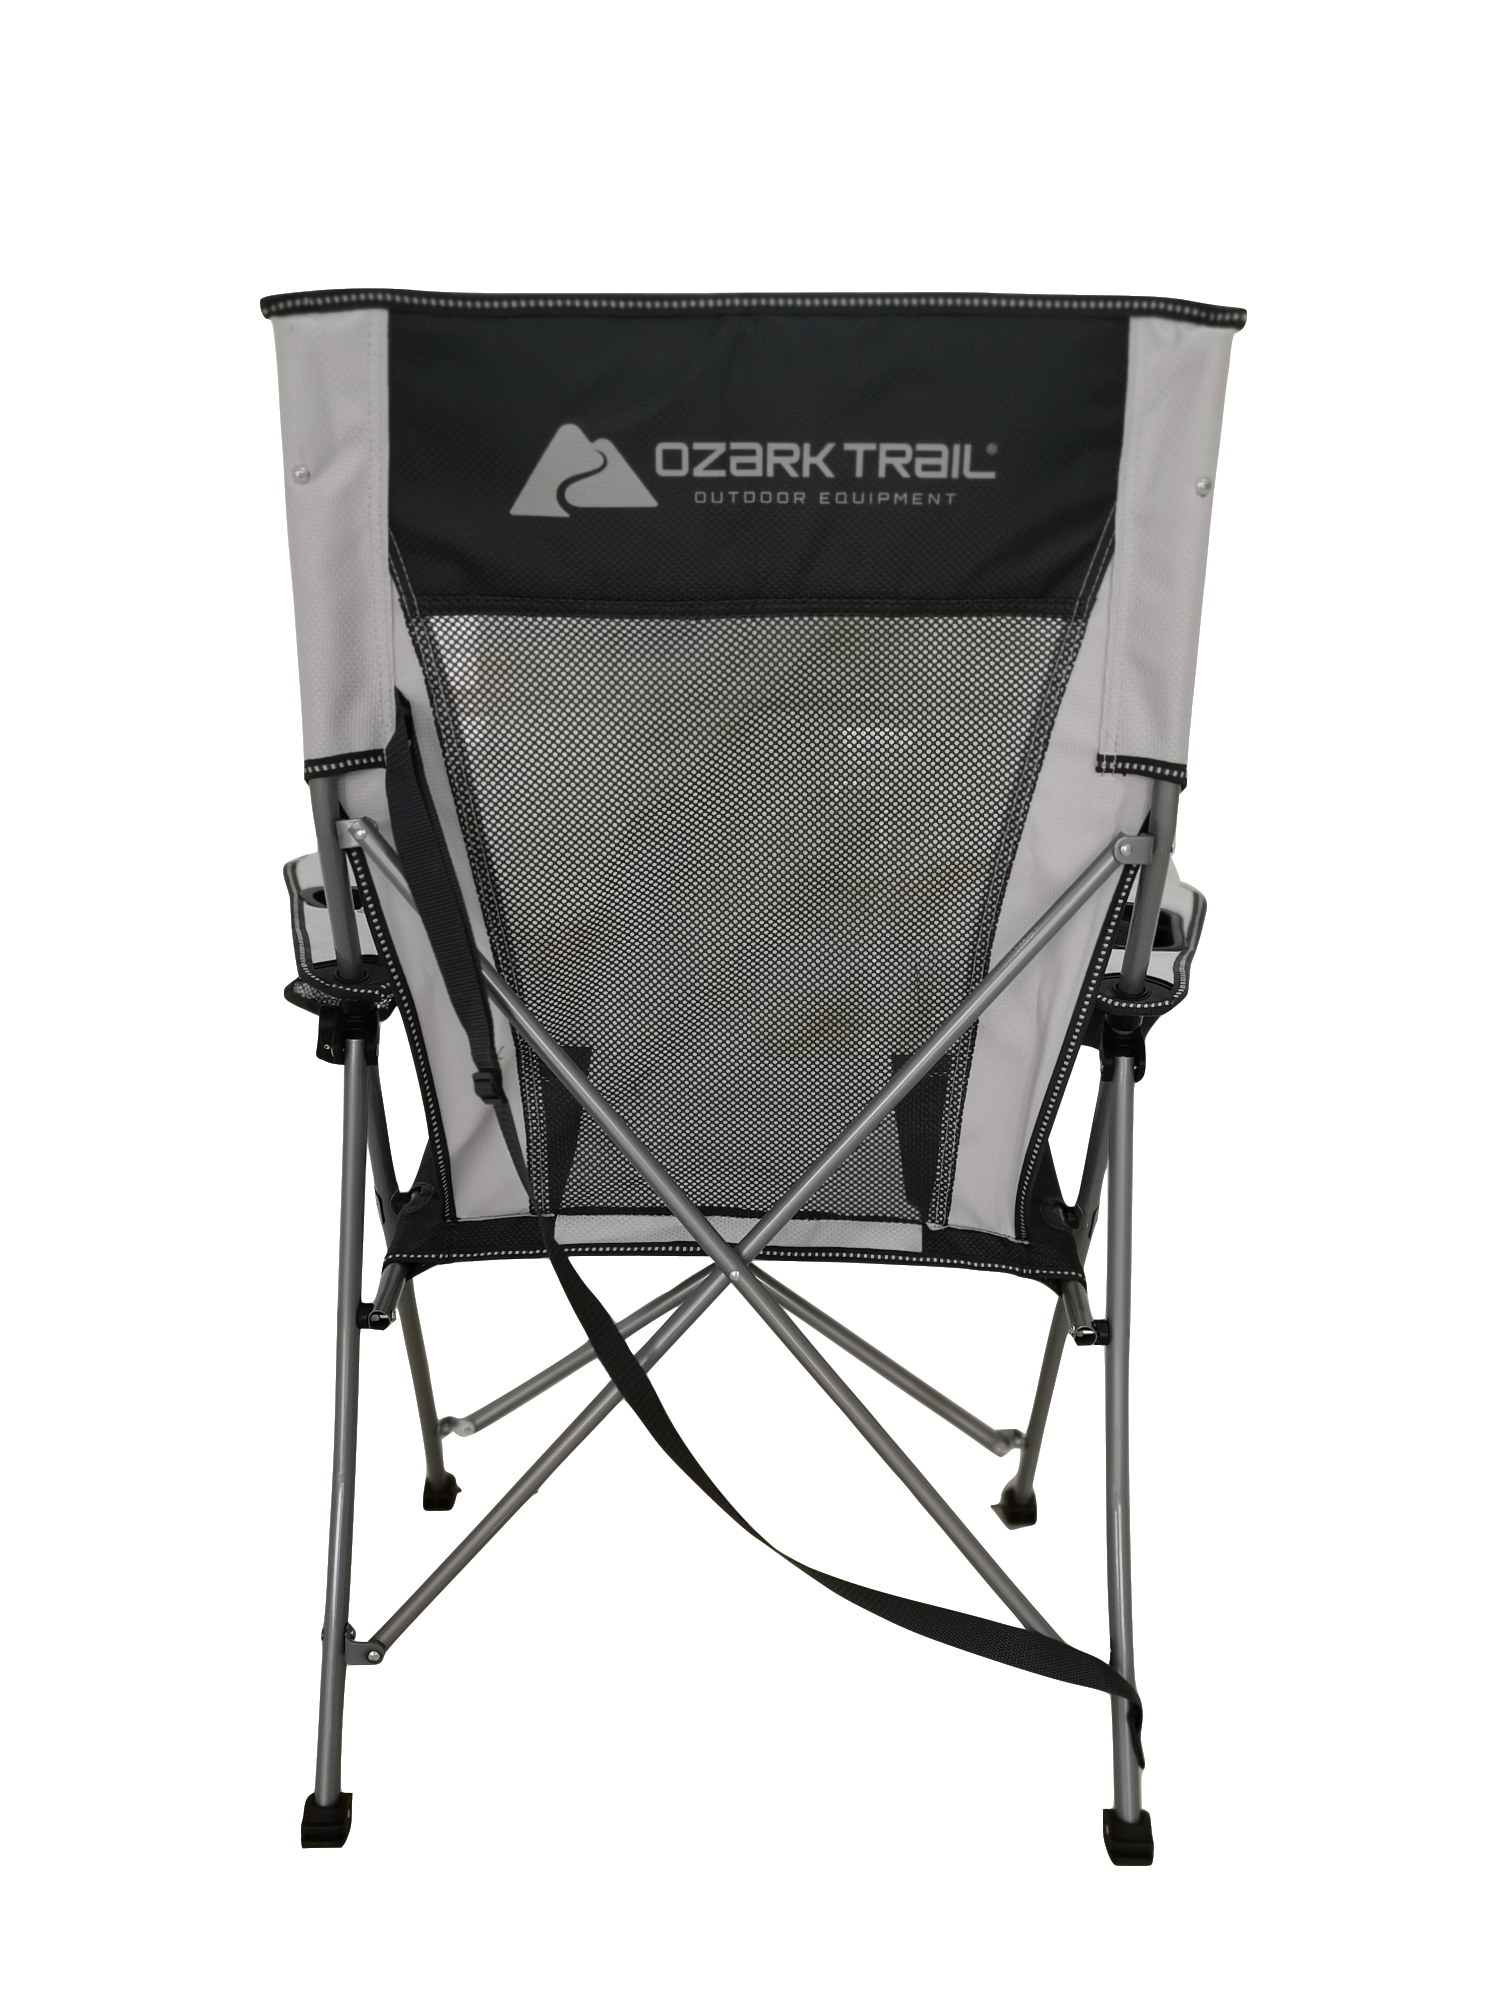 Ozark Trail Tension 2 in 1 Mesh Rocking Camp Chair, Gray and Black, Detachable Rockers, Adult - image 3 of 10